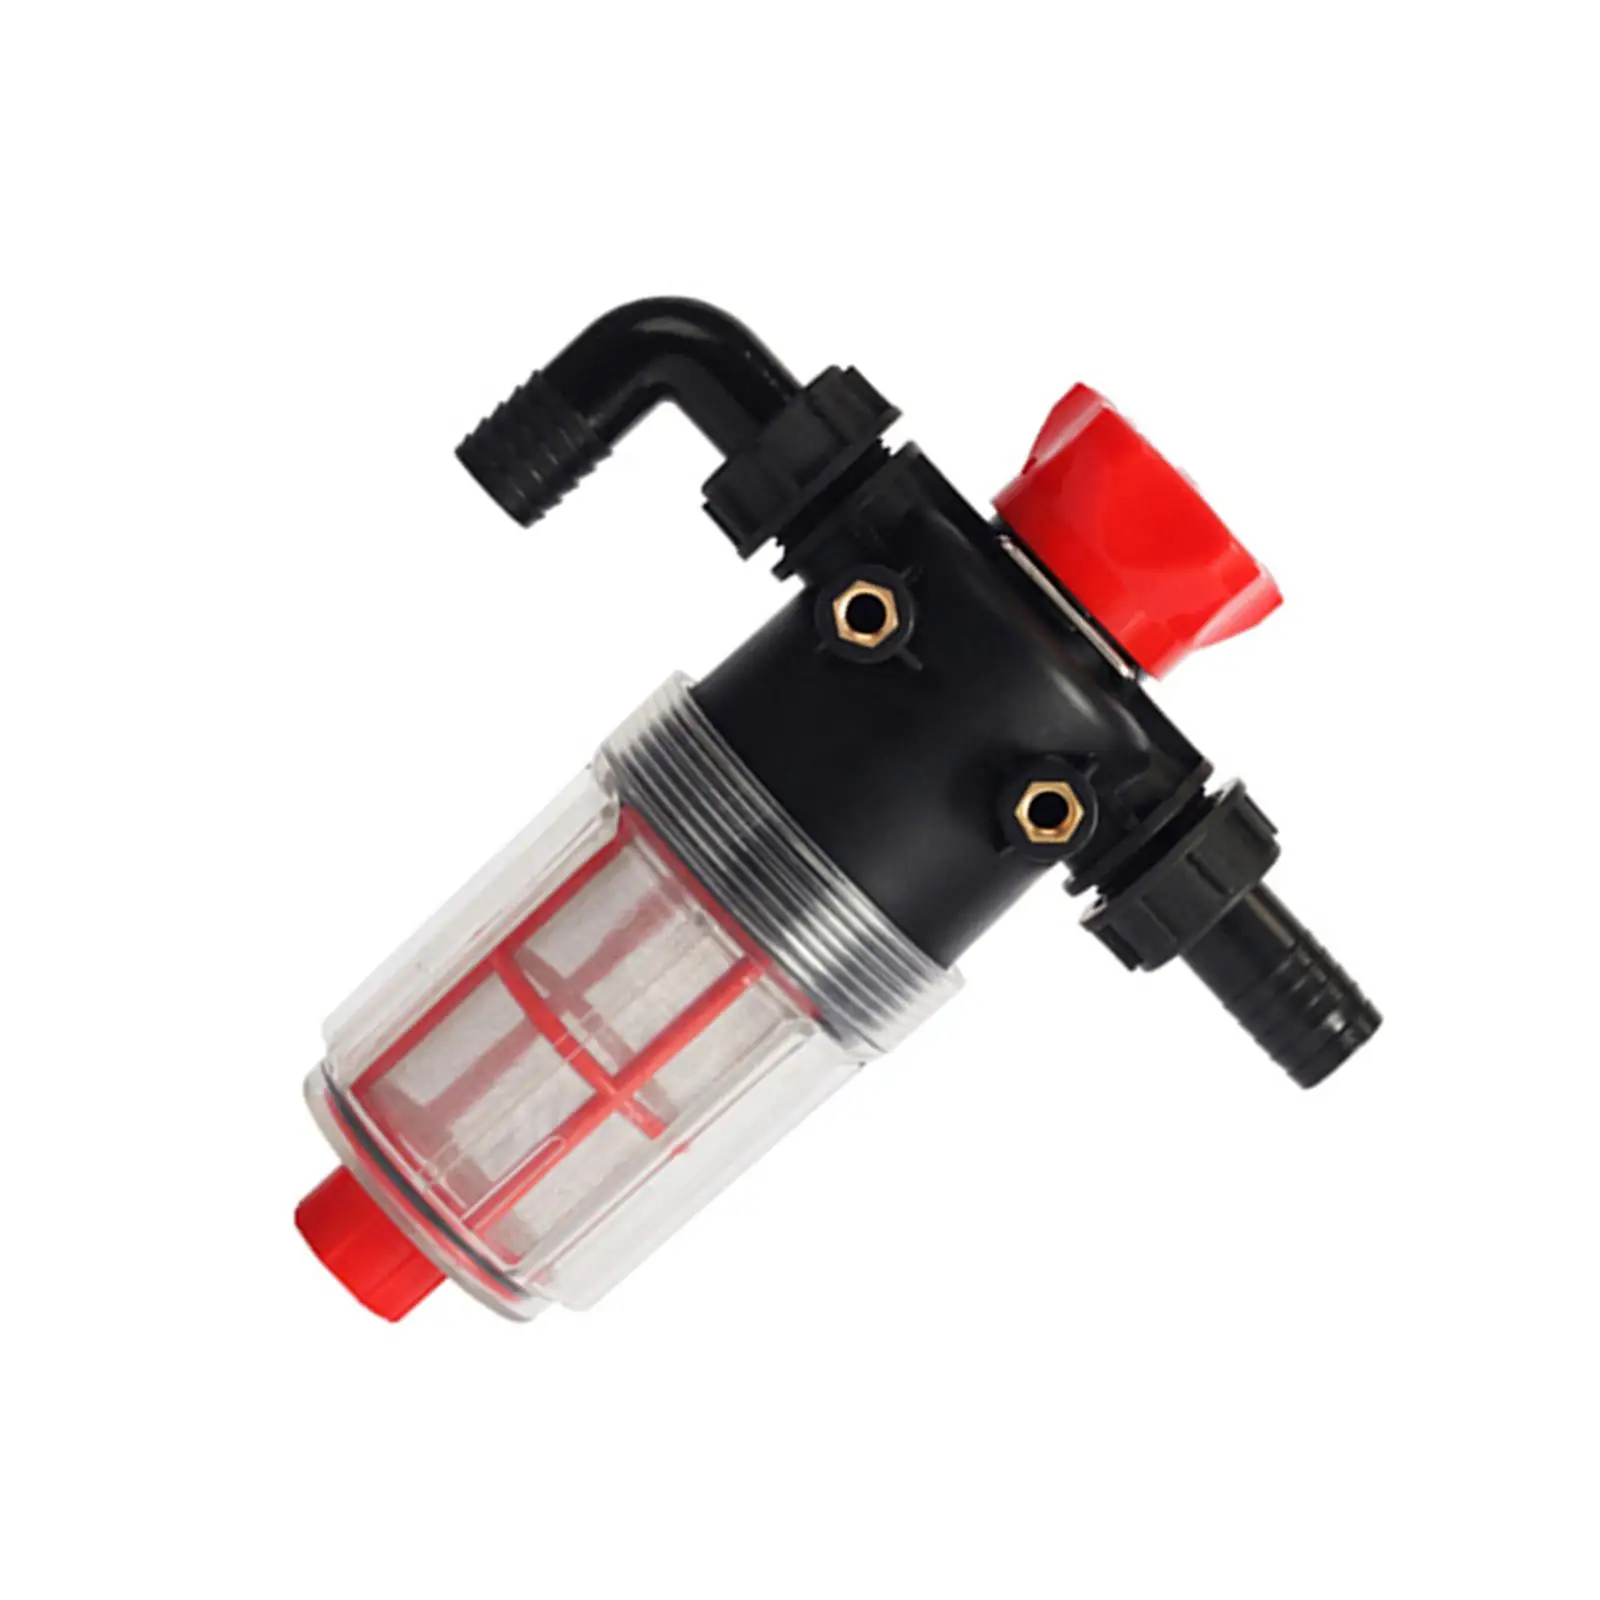 Hose Pipe Filter Parts Replacement Pressure Cleaning Filter Water Strainer Filter for Washing Machine Car Washing Aquarium Pump